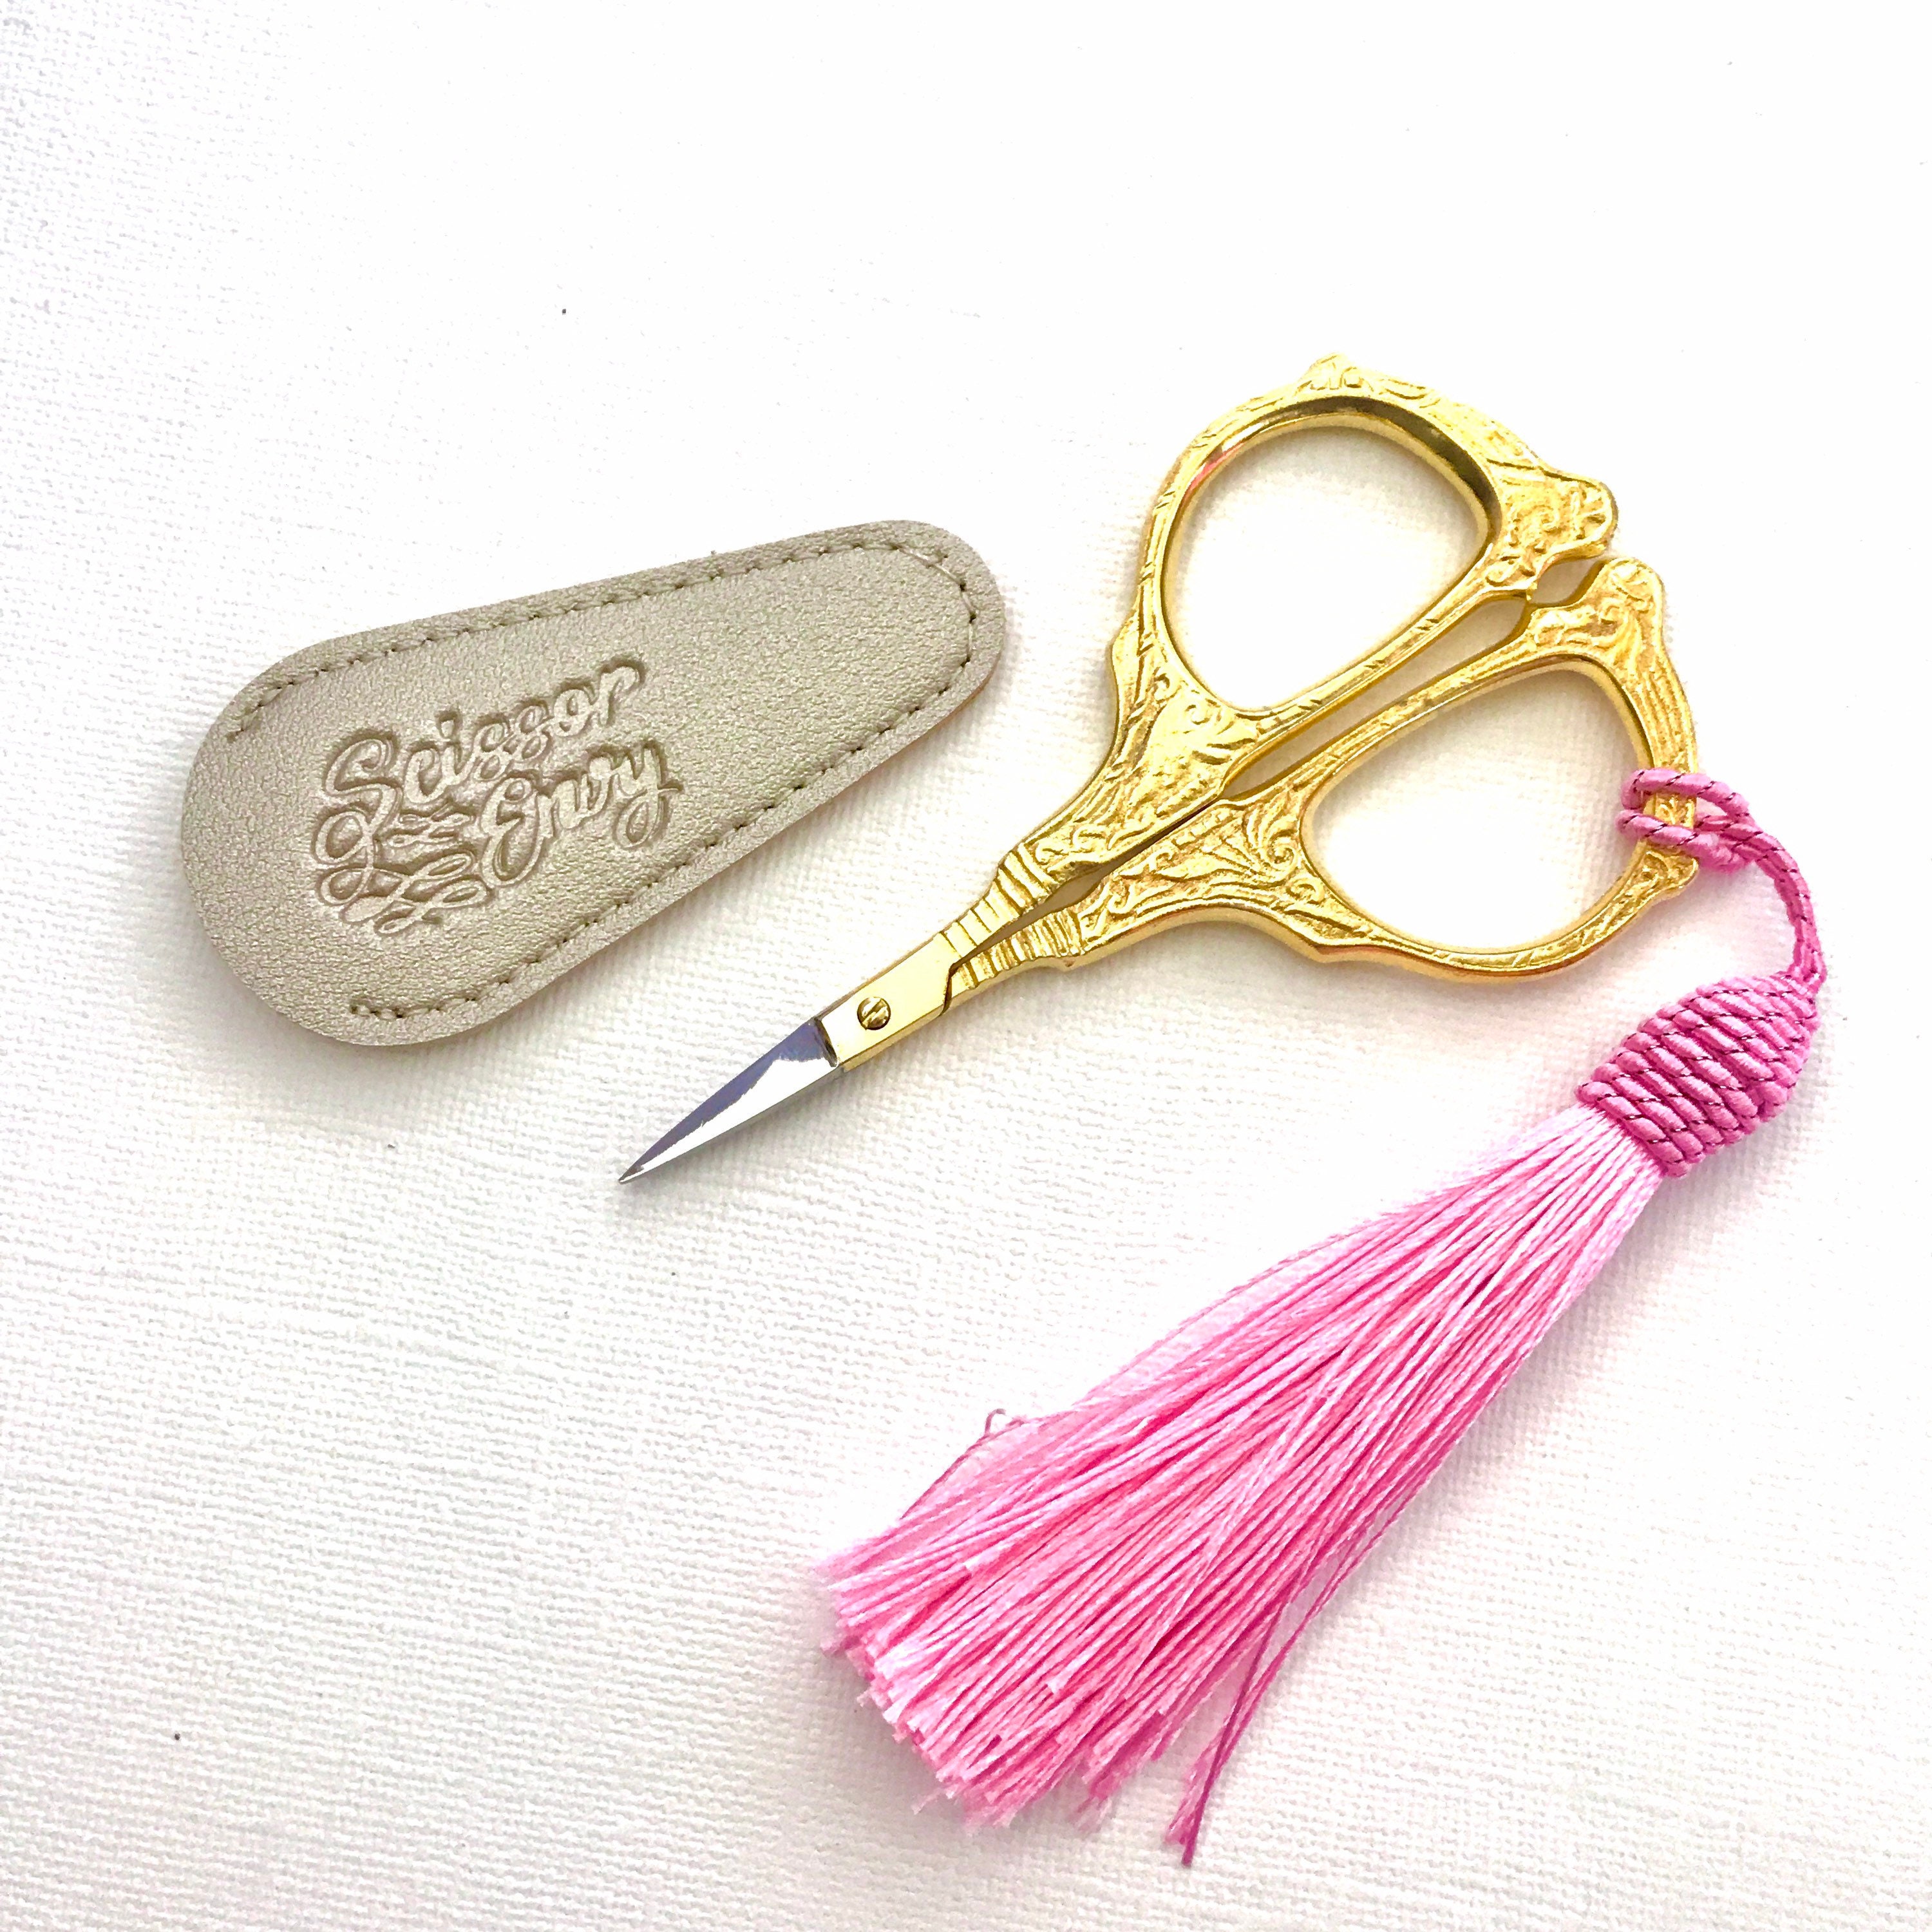 Vintage Stork Craft Scissors, Small Colourful Embroidery Scissors